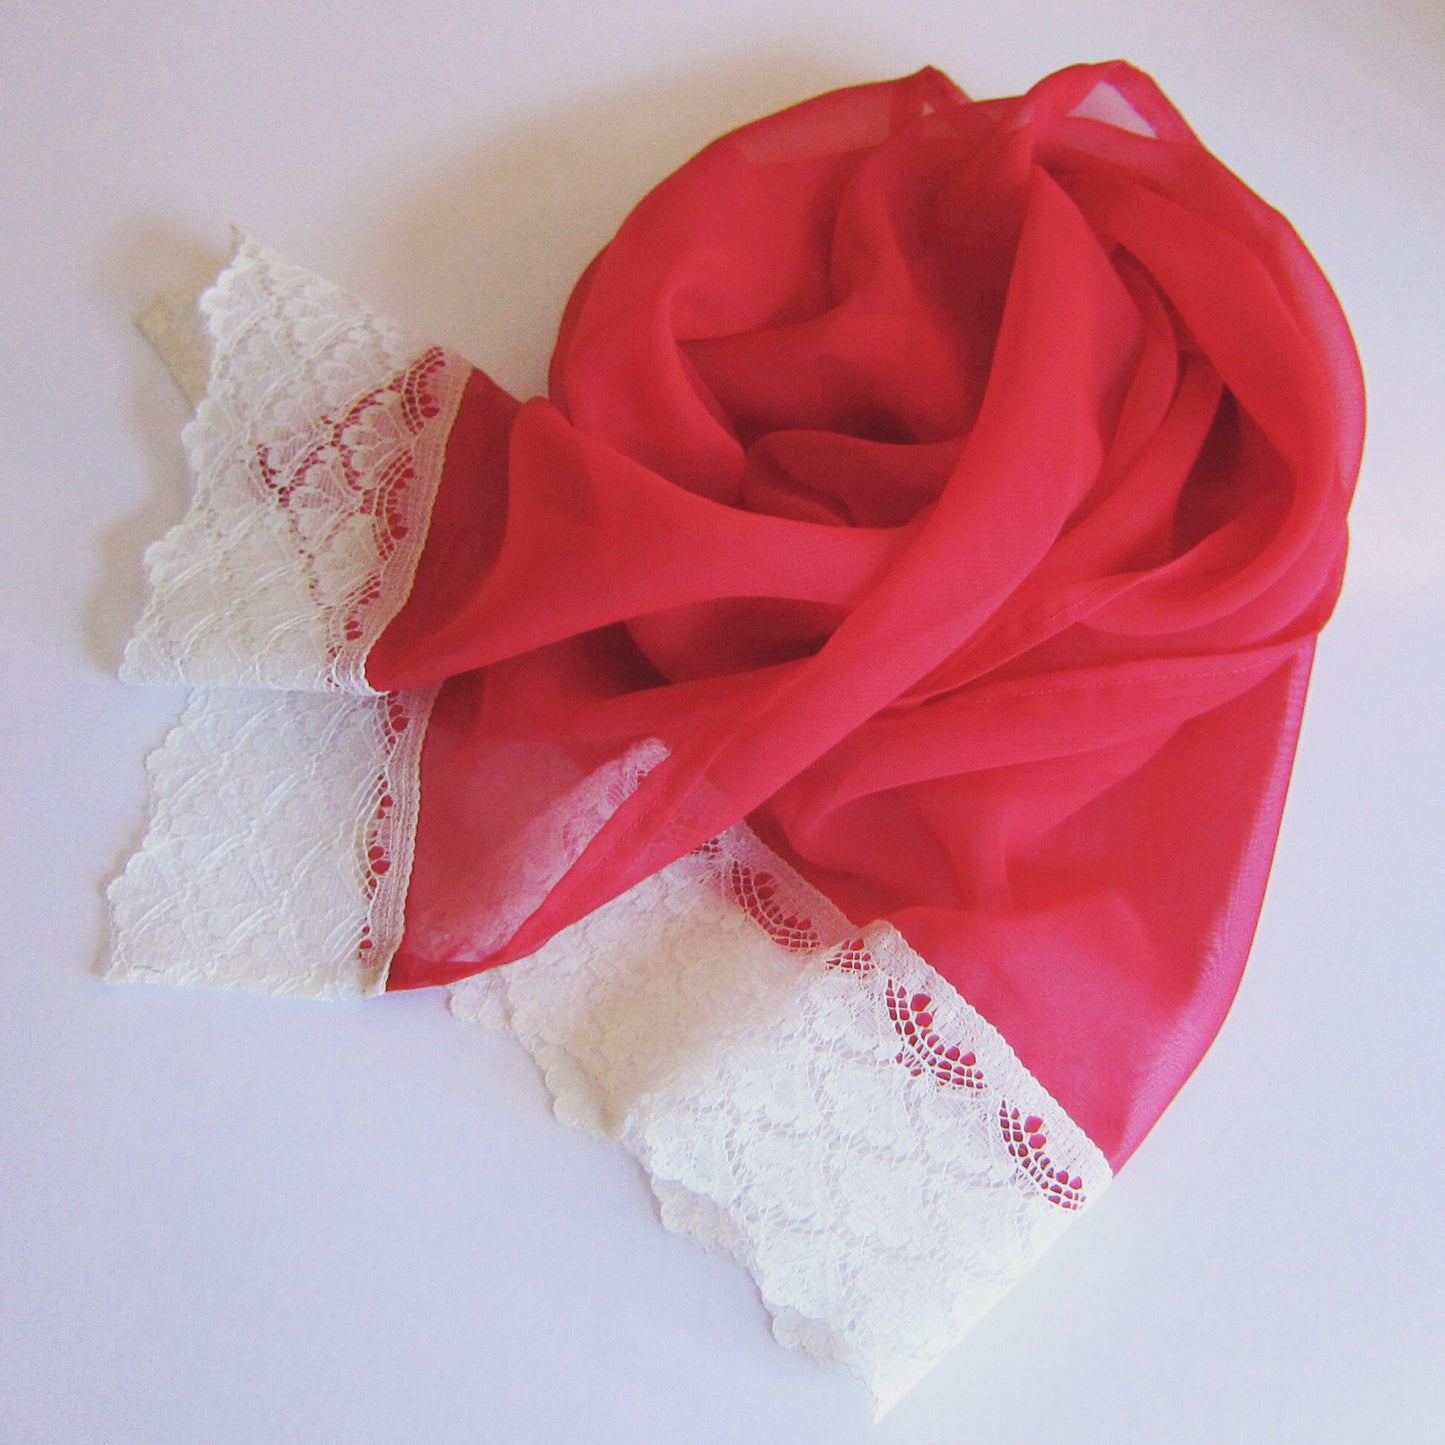 Red Chiffon Scarf With Cream Lace Trim - Style Showroom 